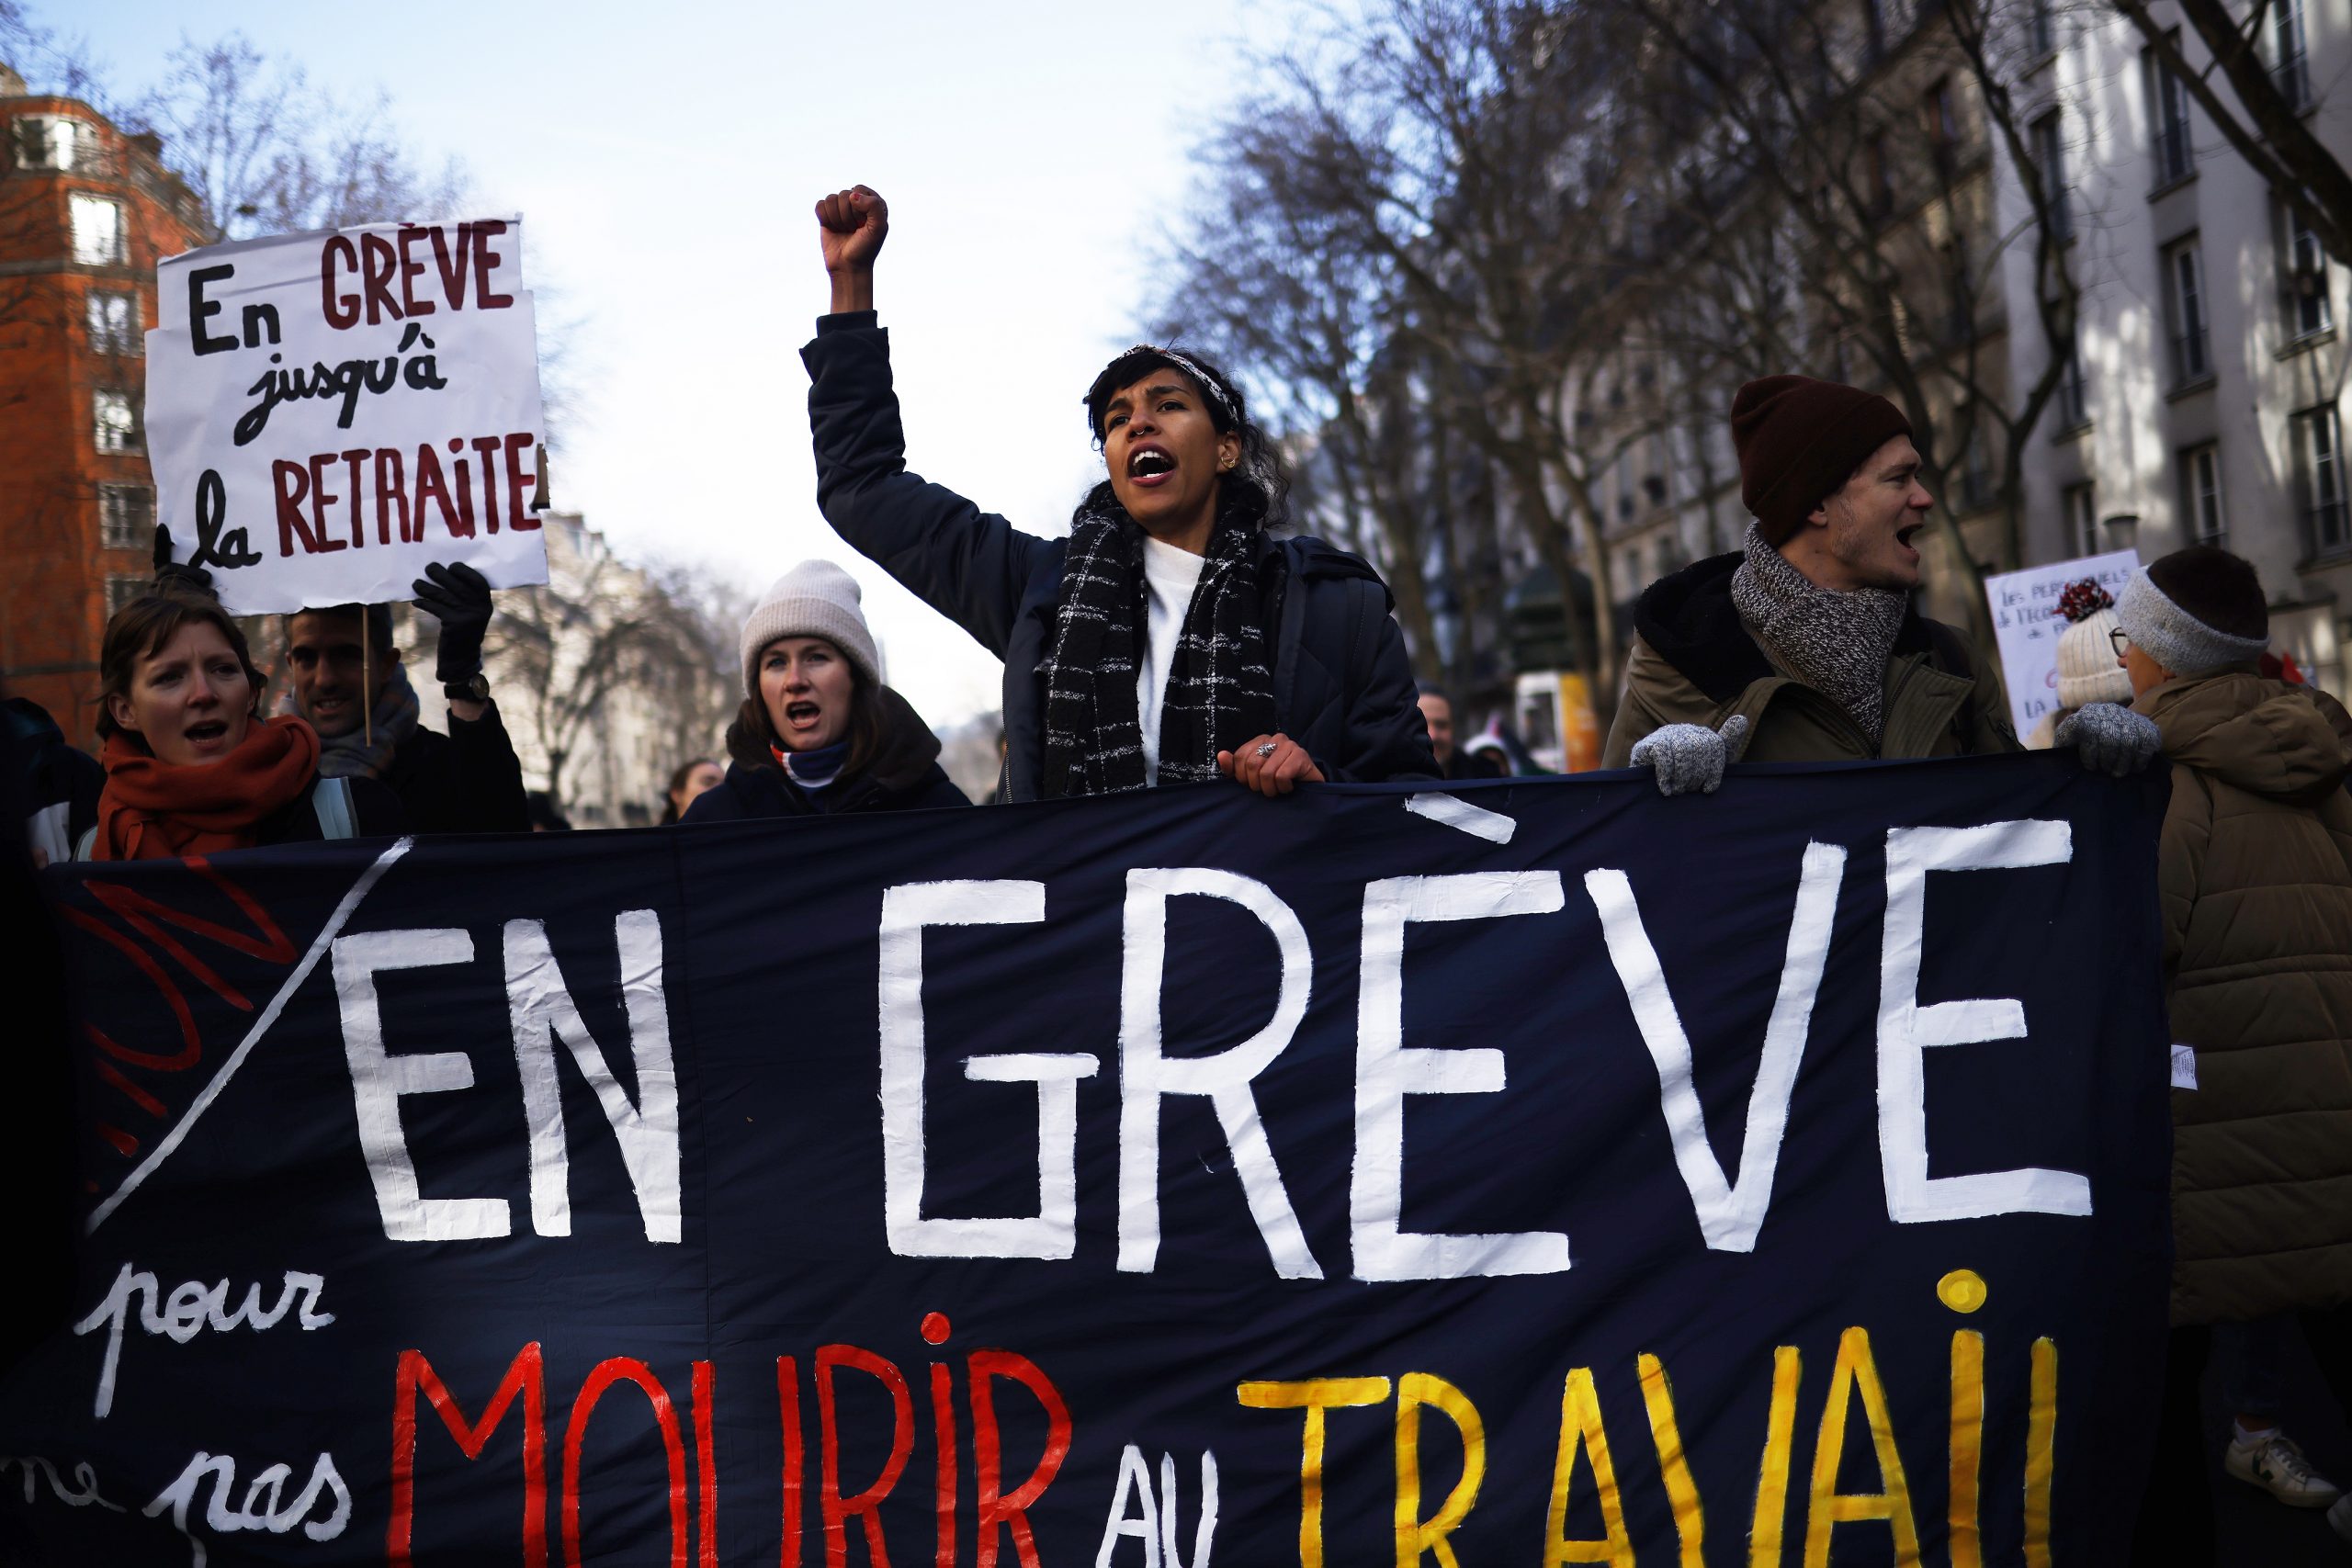 epa10441335 Demonstrators hold a banner reading 'On strike so as not to die at work' as thousands of protesters take part in a demonstration against the government's reform of the pension system, in Paris, France, 31 January 2023. The French government plans to raise the minimum retirement age from 62 to 64 by 2030.  EPA/YOAN VALAT